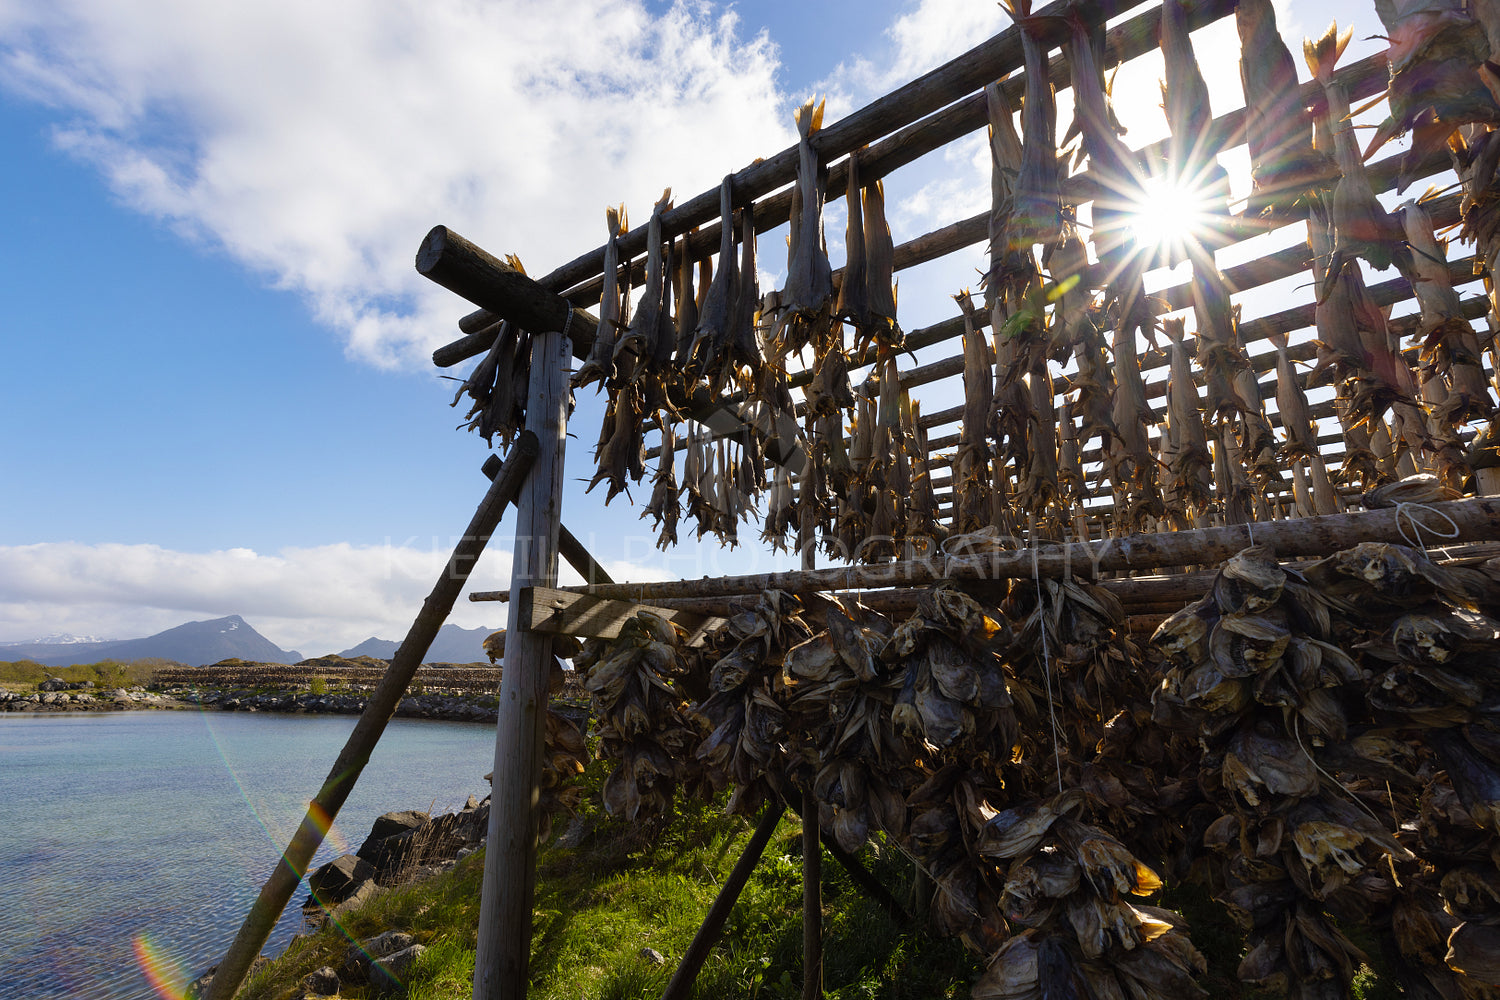 Cod fish drying on traditional wooden racks in the sun in Lofoten Islands, Norway, Europe